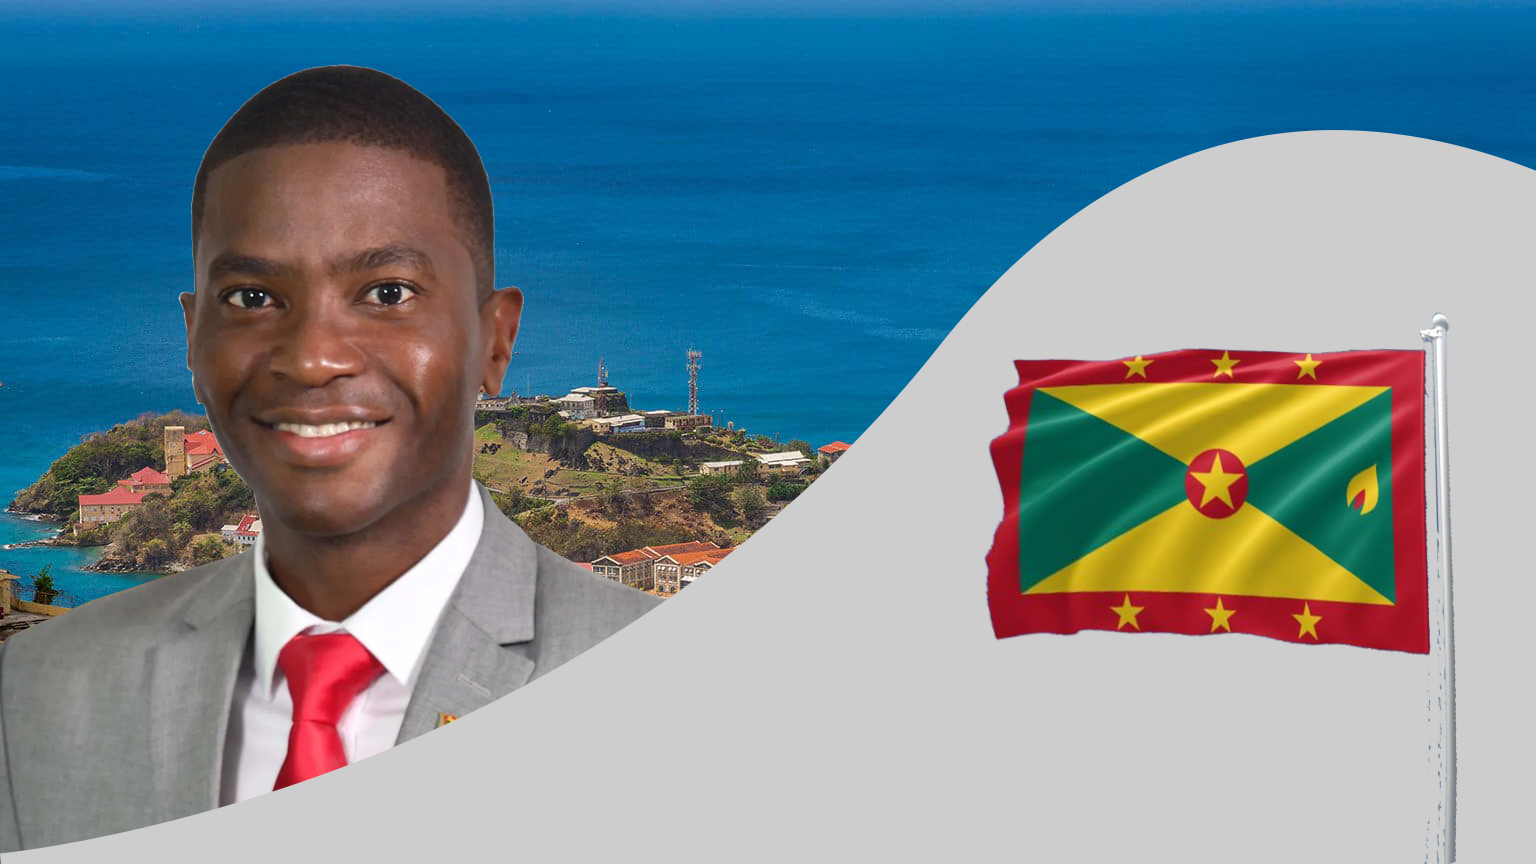 MANDATORY PERSONAL INTERVIEWS FOR GRENADA CITIZENSHIP BY INVESTMENT APPLICANTS